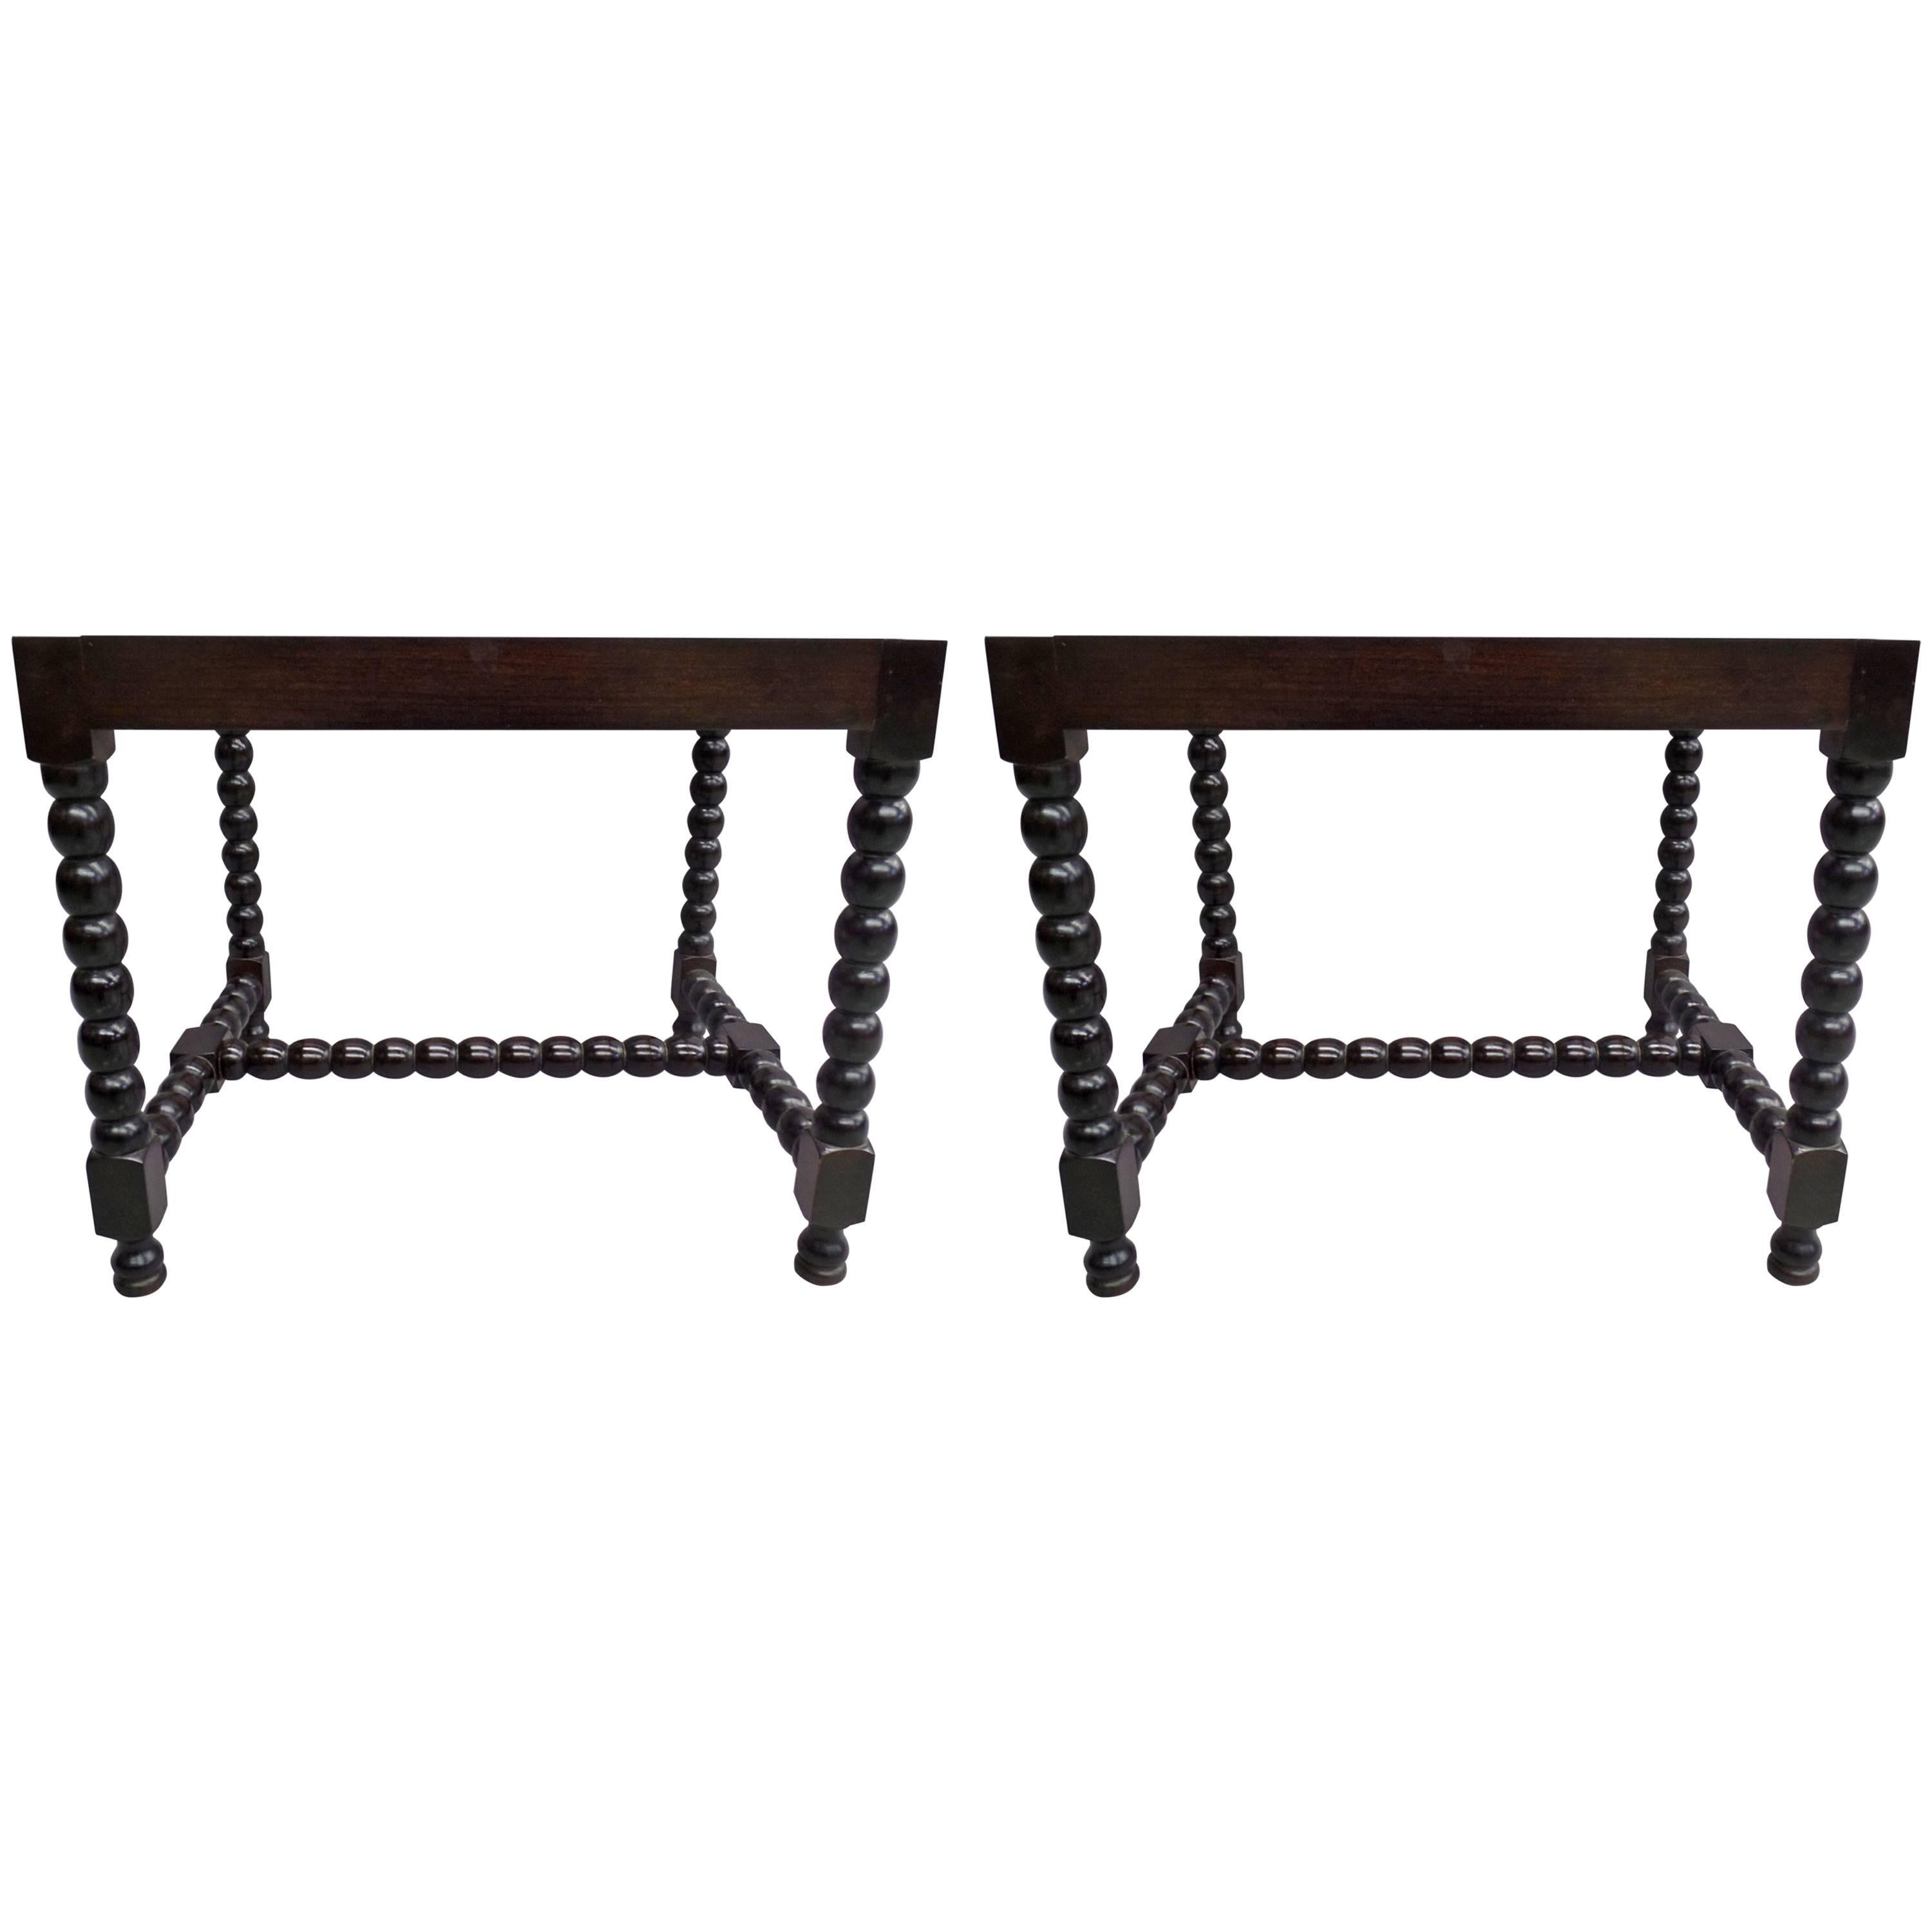 Pair of Sober Modern Neoclassical Carved Wood Stacked Ball Benches / Stools For Sale